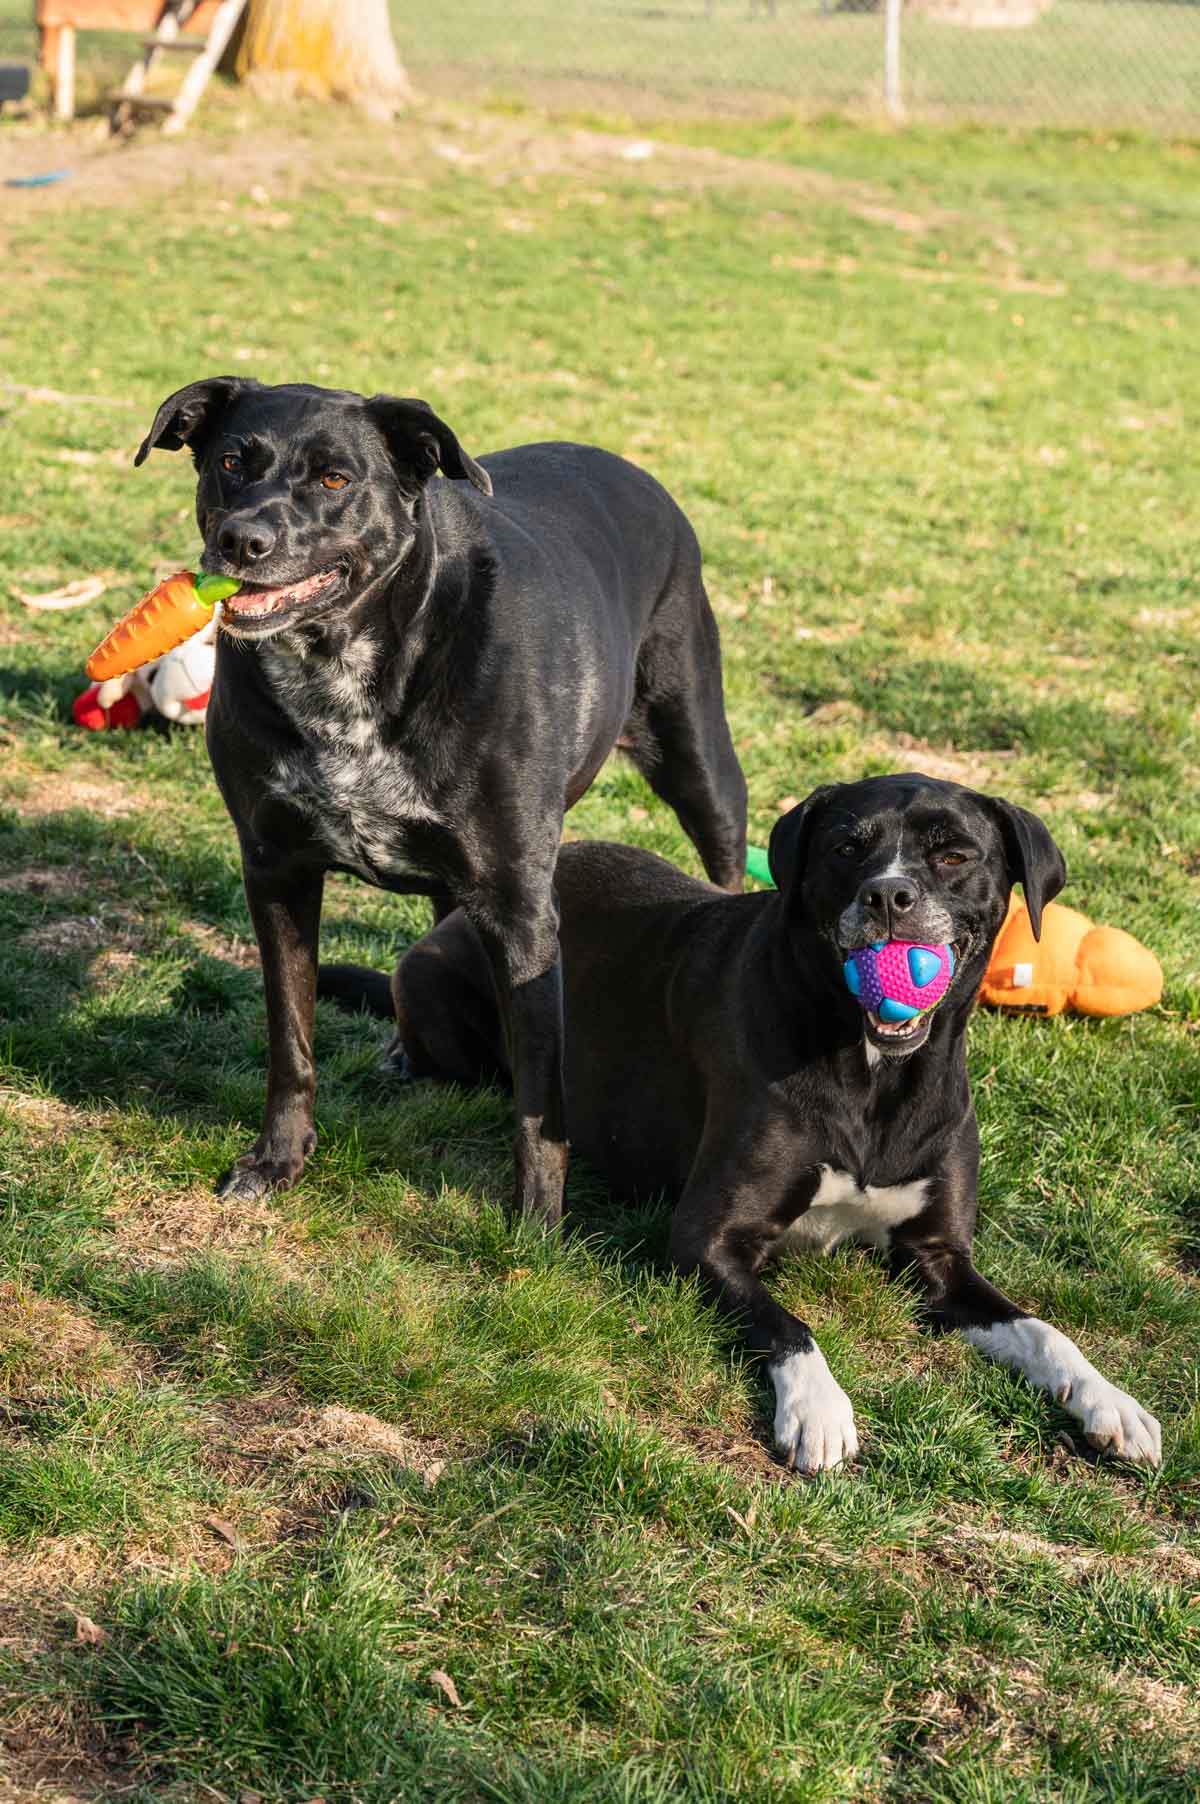 Two black and white dogs stand and sit on grass with toys in their mouth